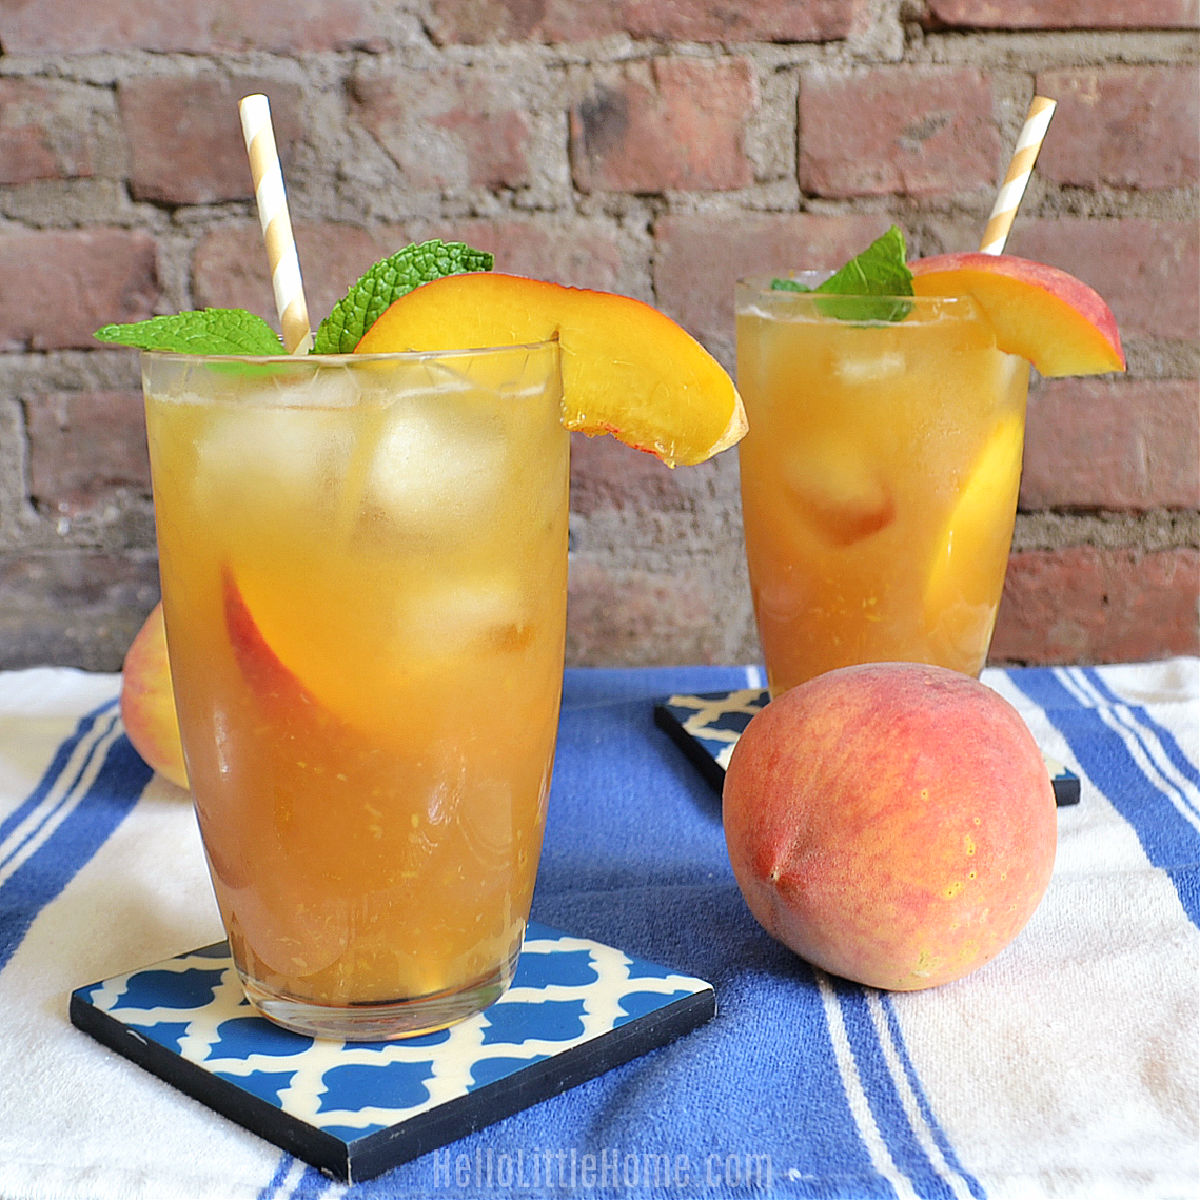 Two glasses of the finished Tea Cooler served next to a peach on a striped tablecloth.